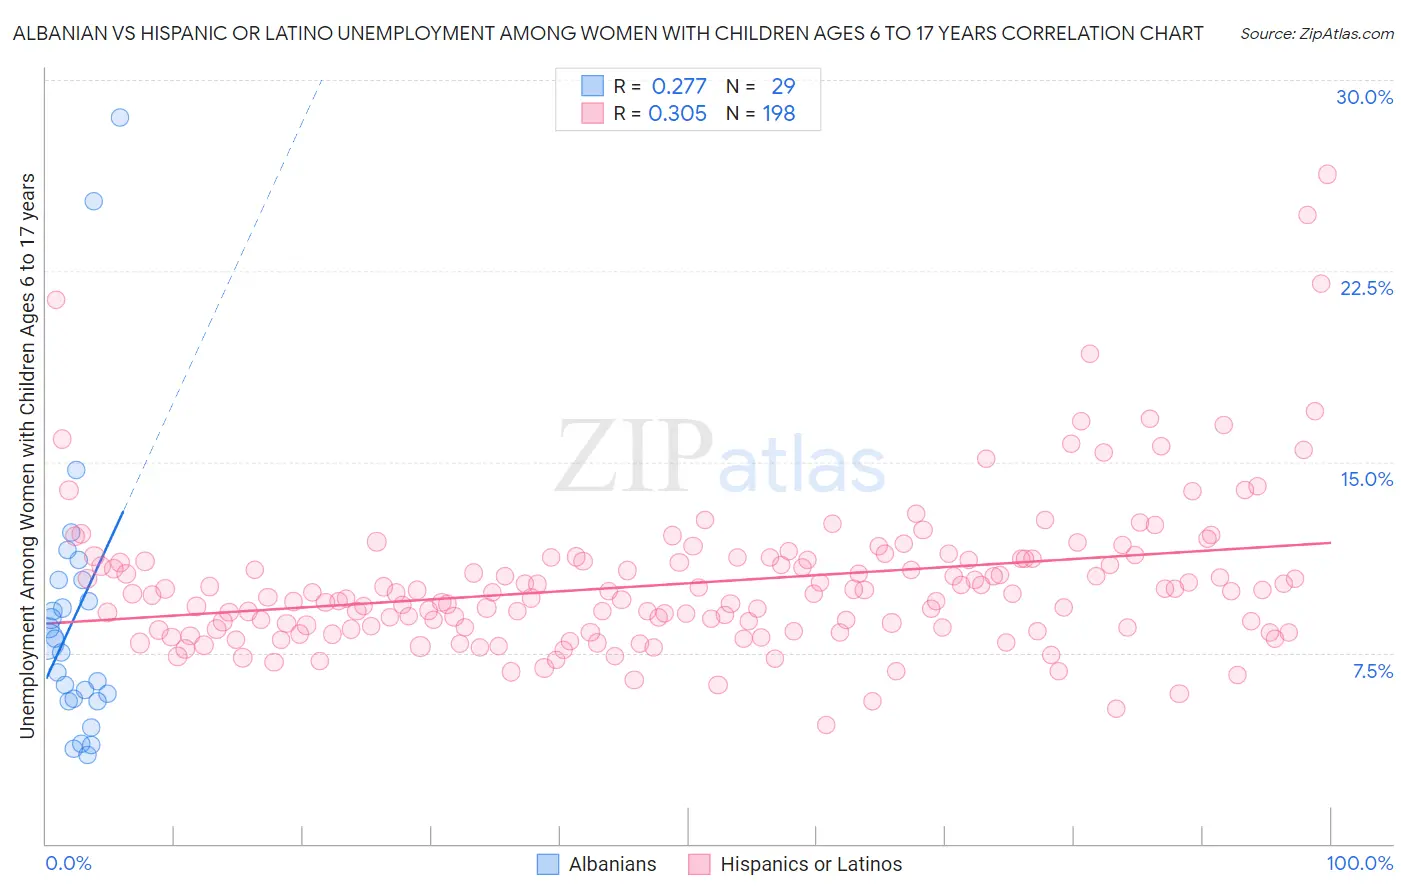 Albanian vs Hispanic or Latino Unemployment Among Women with Children Ages 6 to 17 years